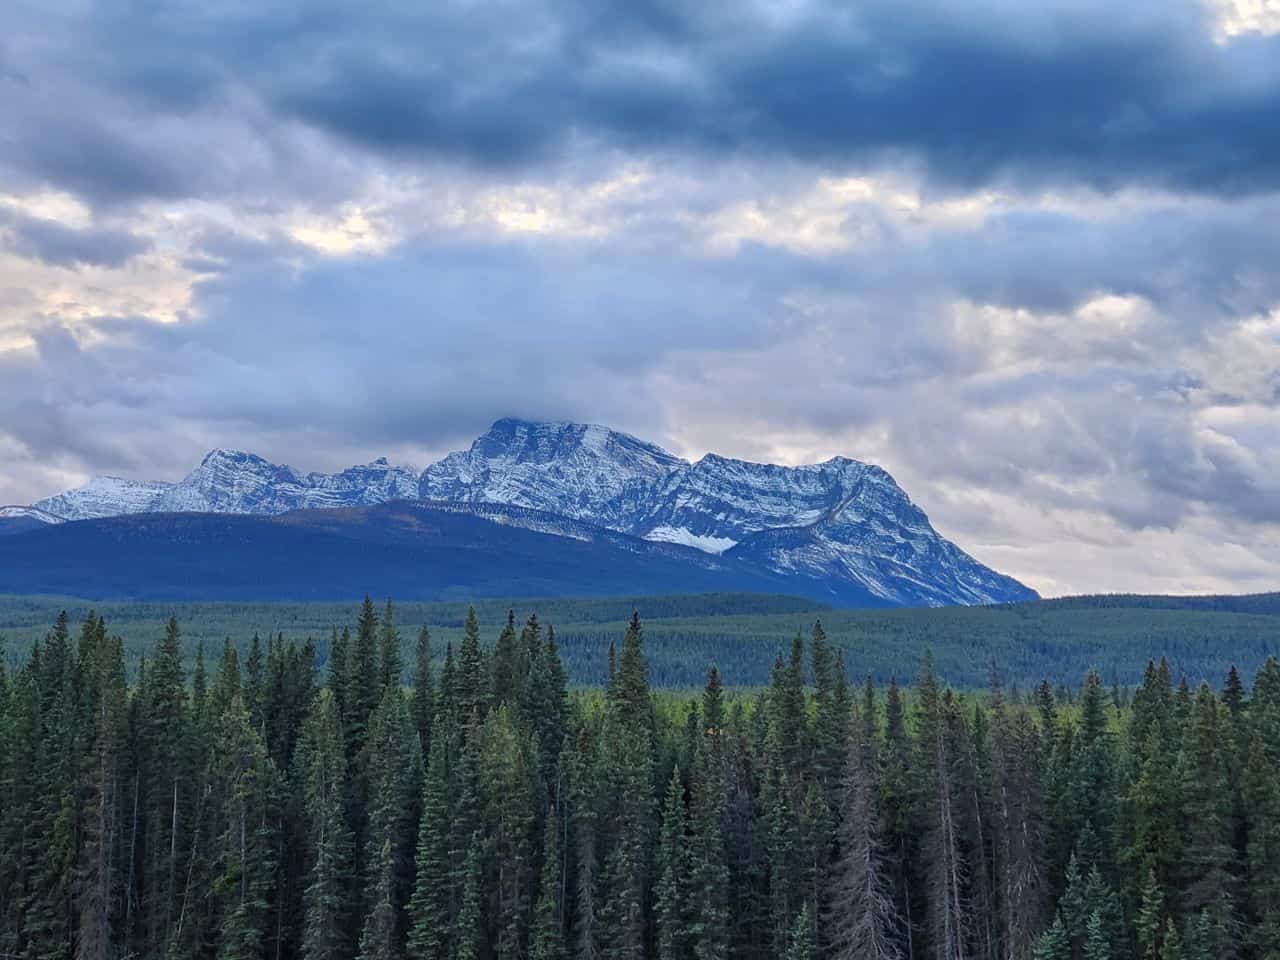 Banff Mountain views while roadtripping on the Bow Valley Highway in Alberta Canada.